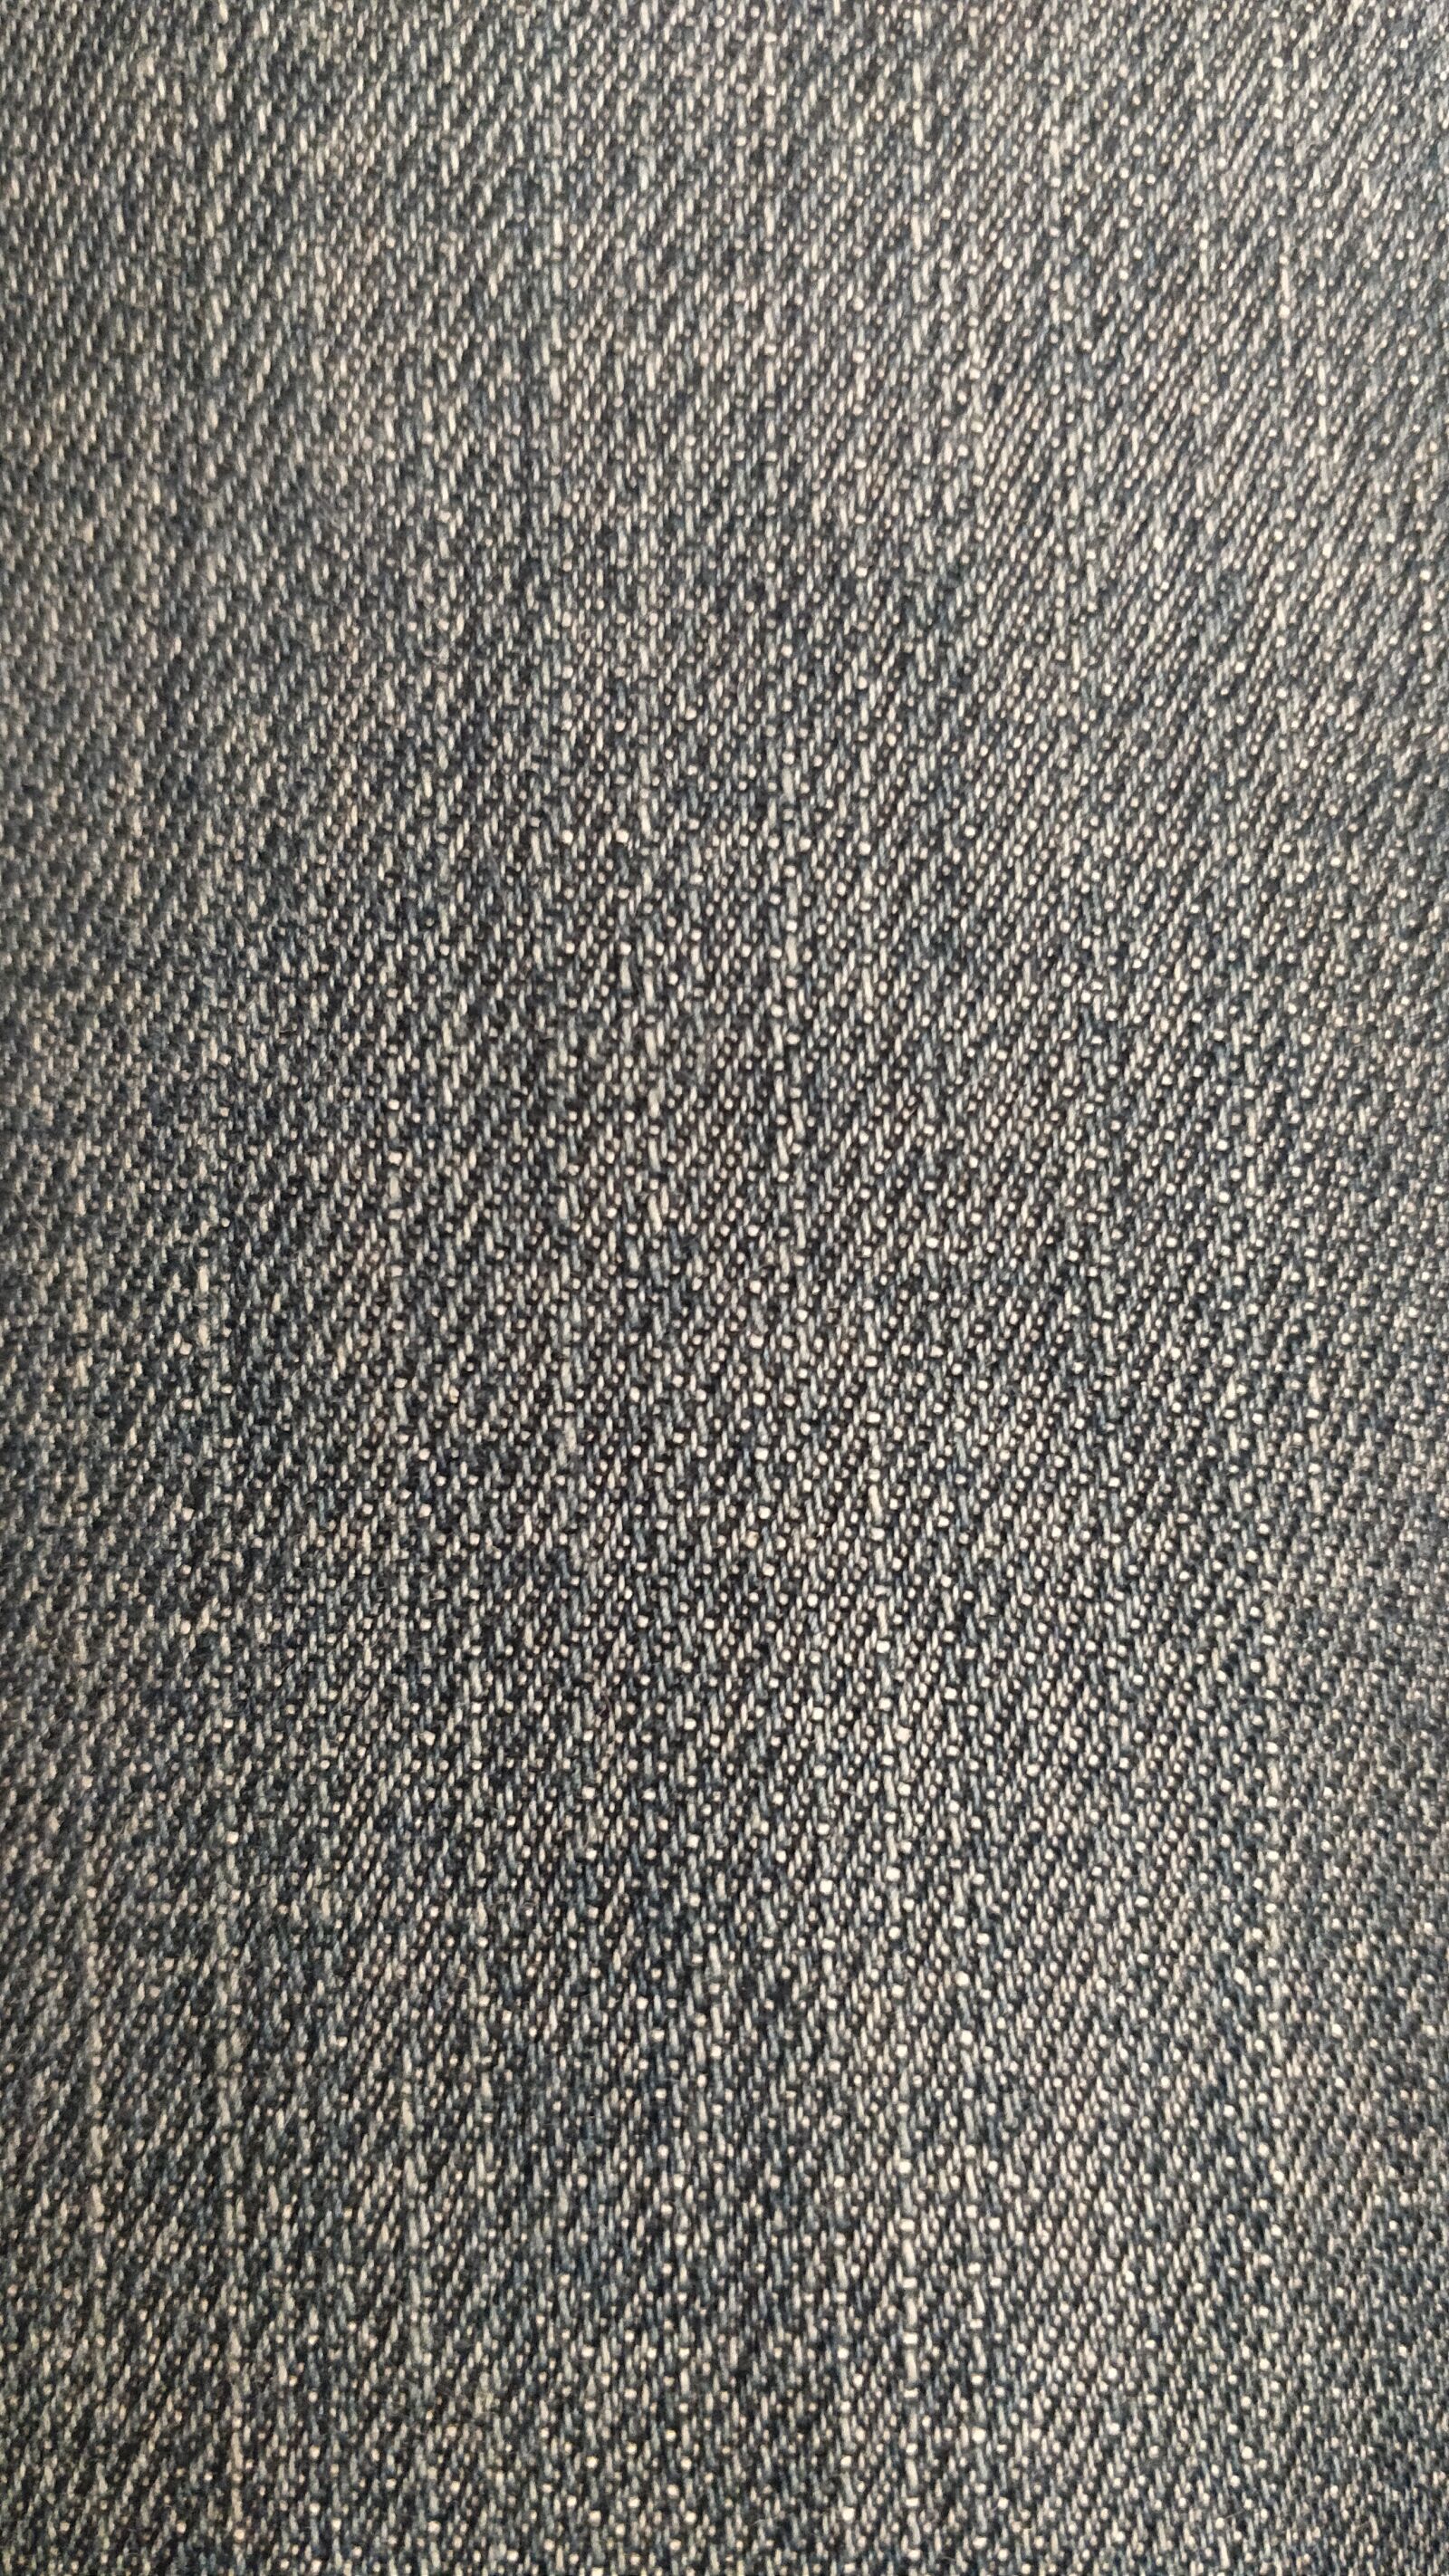 OnePlus 5 sample photo. Fabric, pattern, texture photography